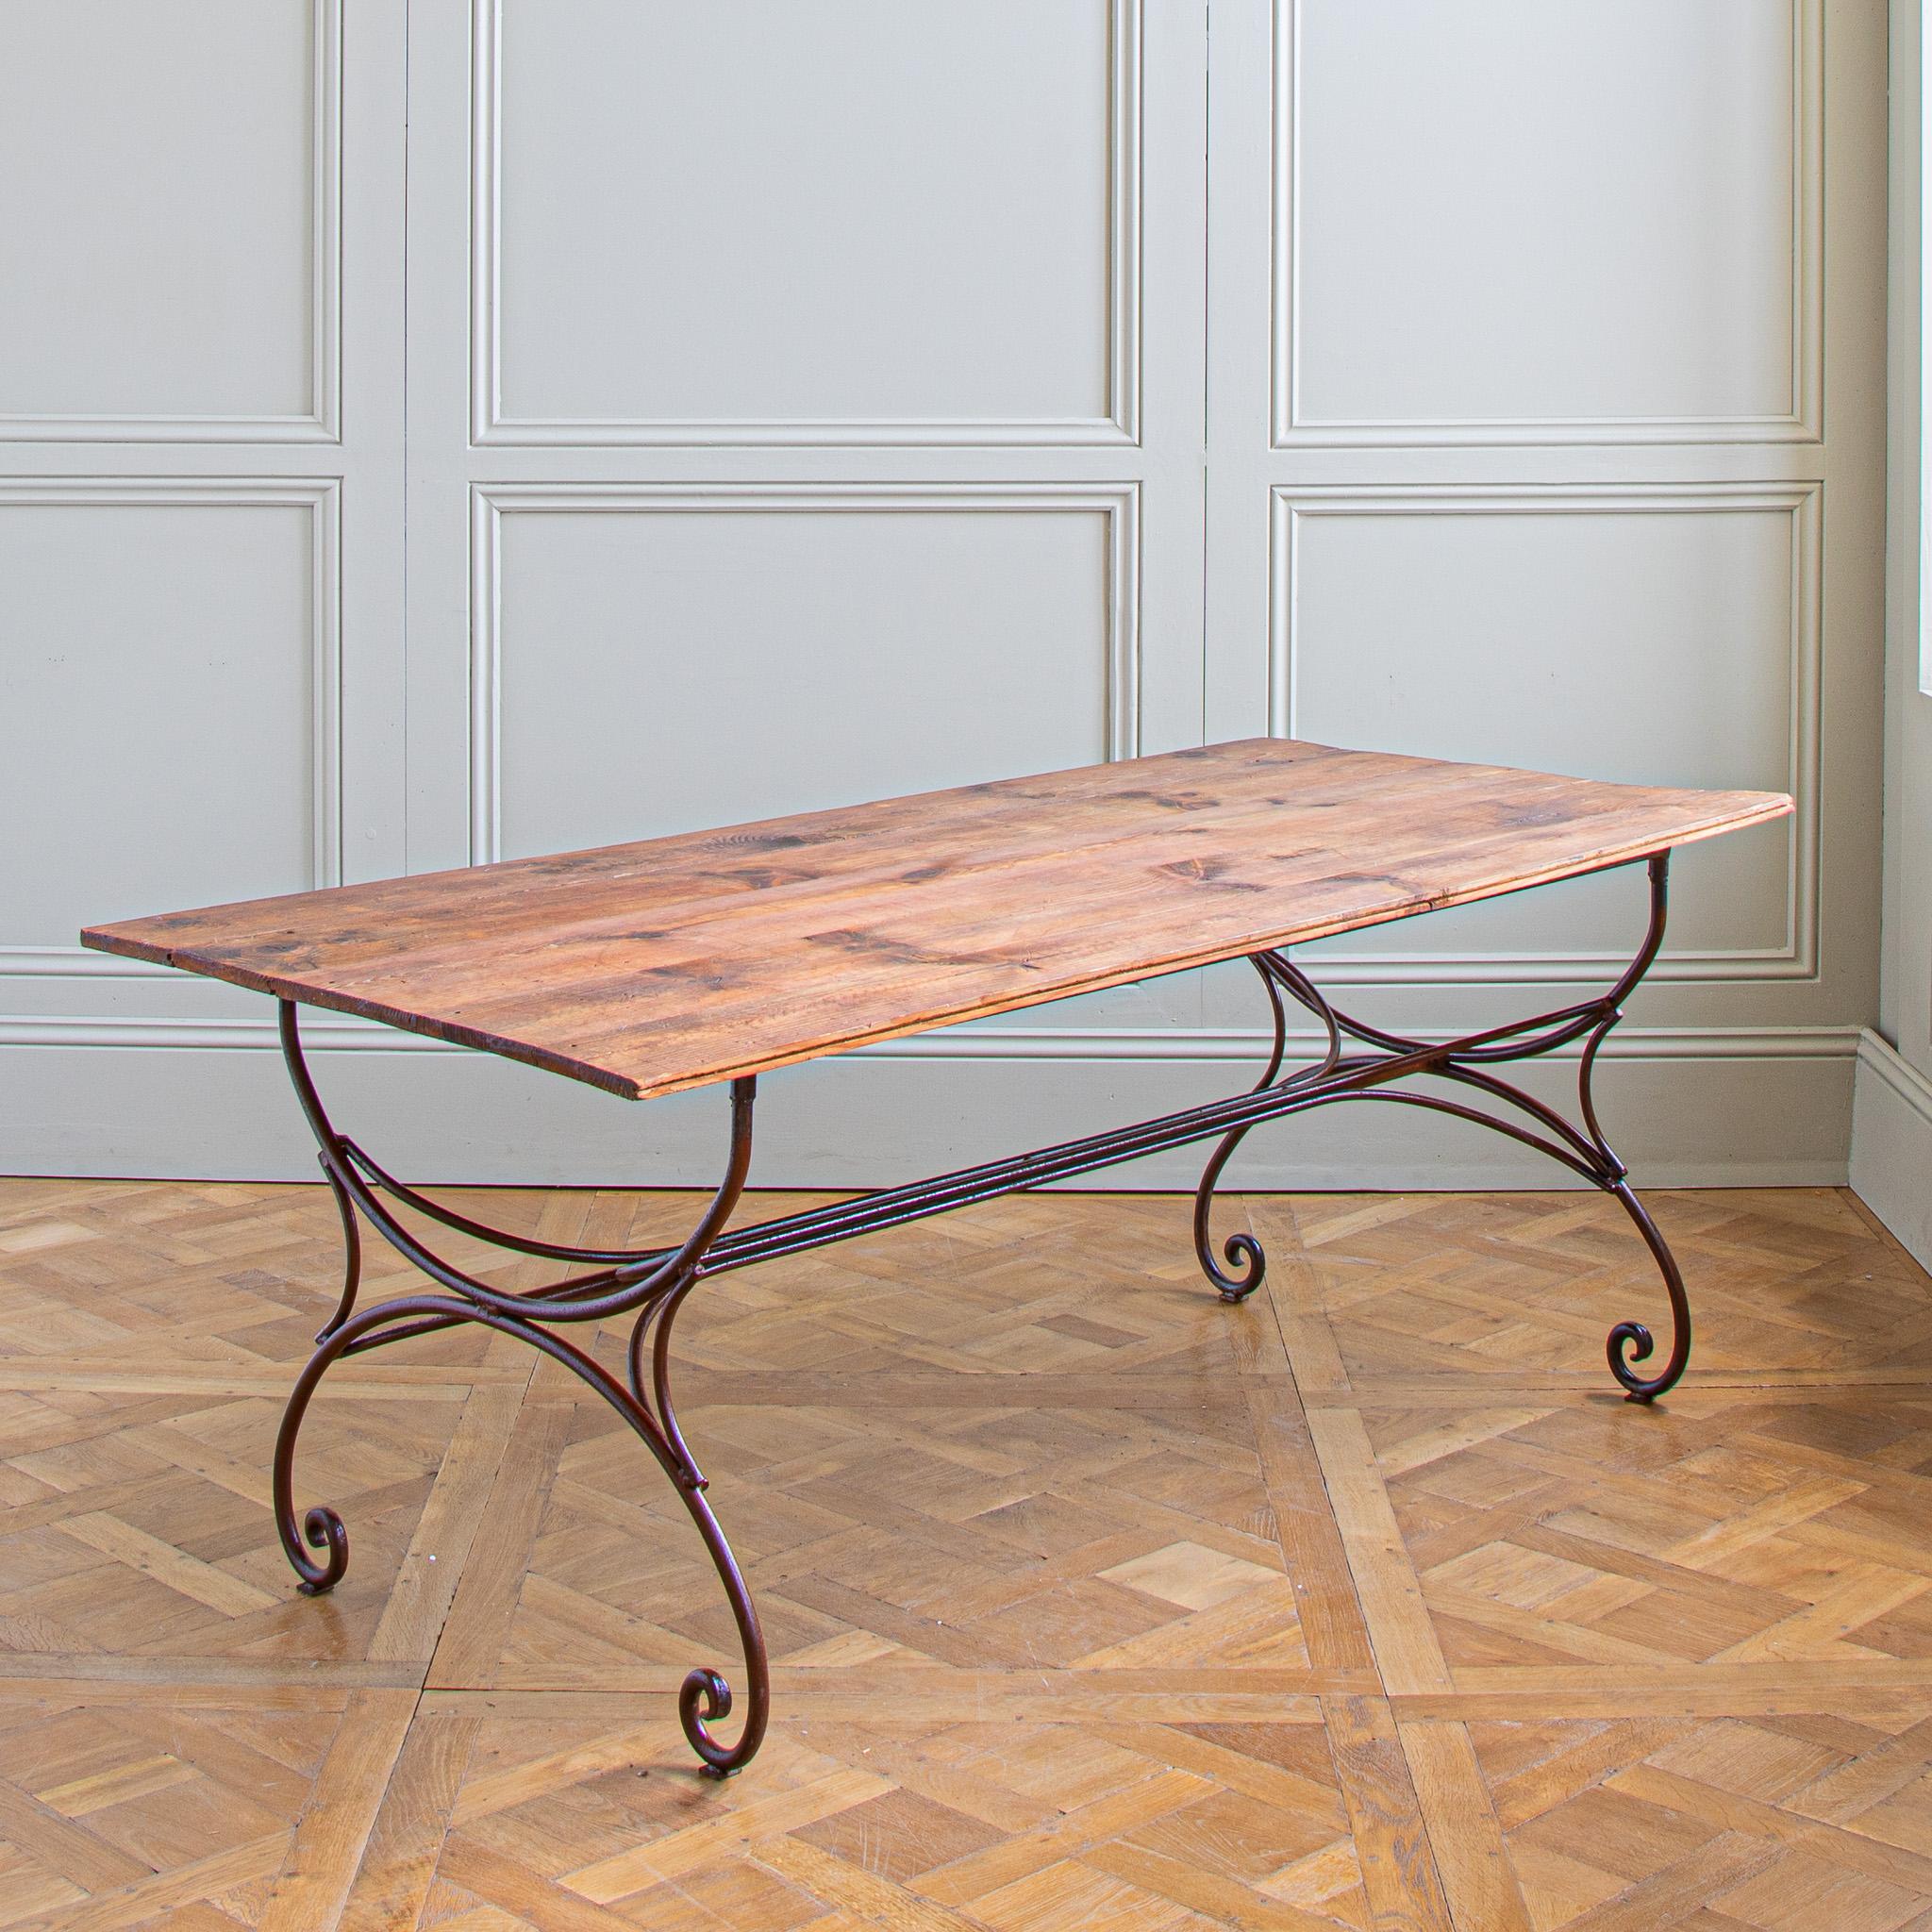 A large, mid century, rustic table from the South of France which can be used indoors or out. The wrought iron base has a deep, age-oxidised, reddish hue which has been polished and sealed to preserve. The curved base of hand-worked lines looks